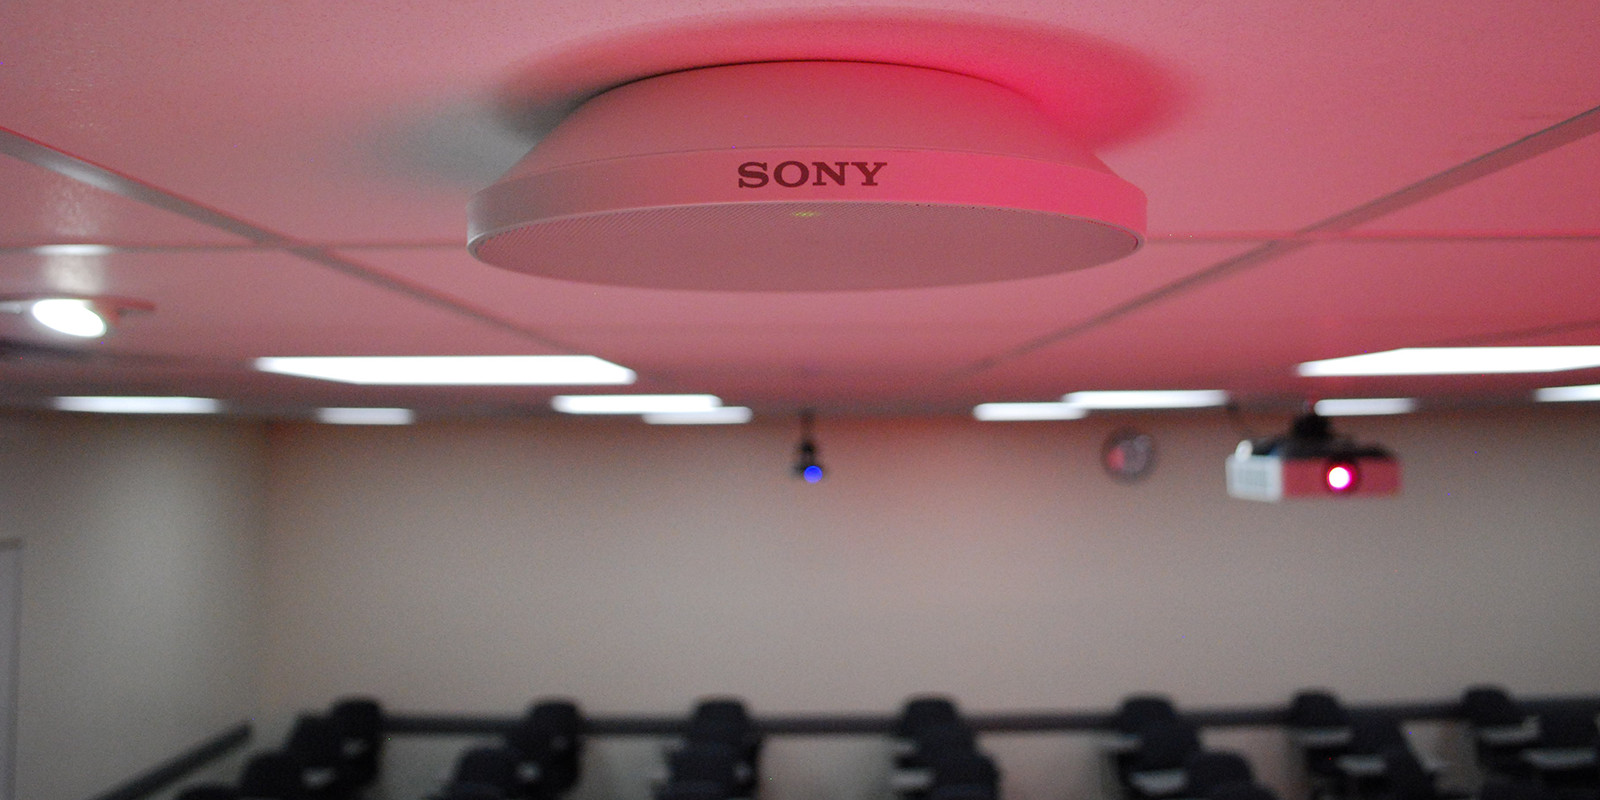 Image of Ceiling Sony Microphone